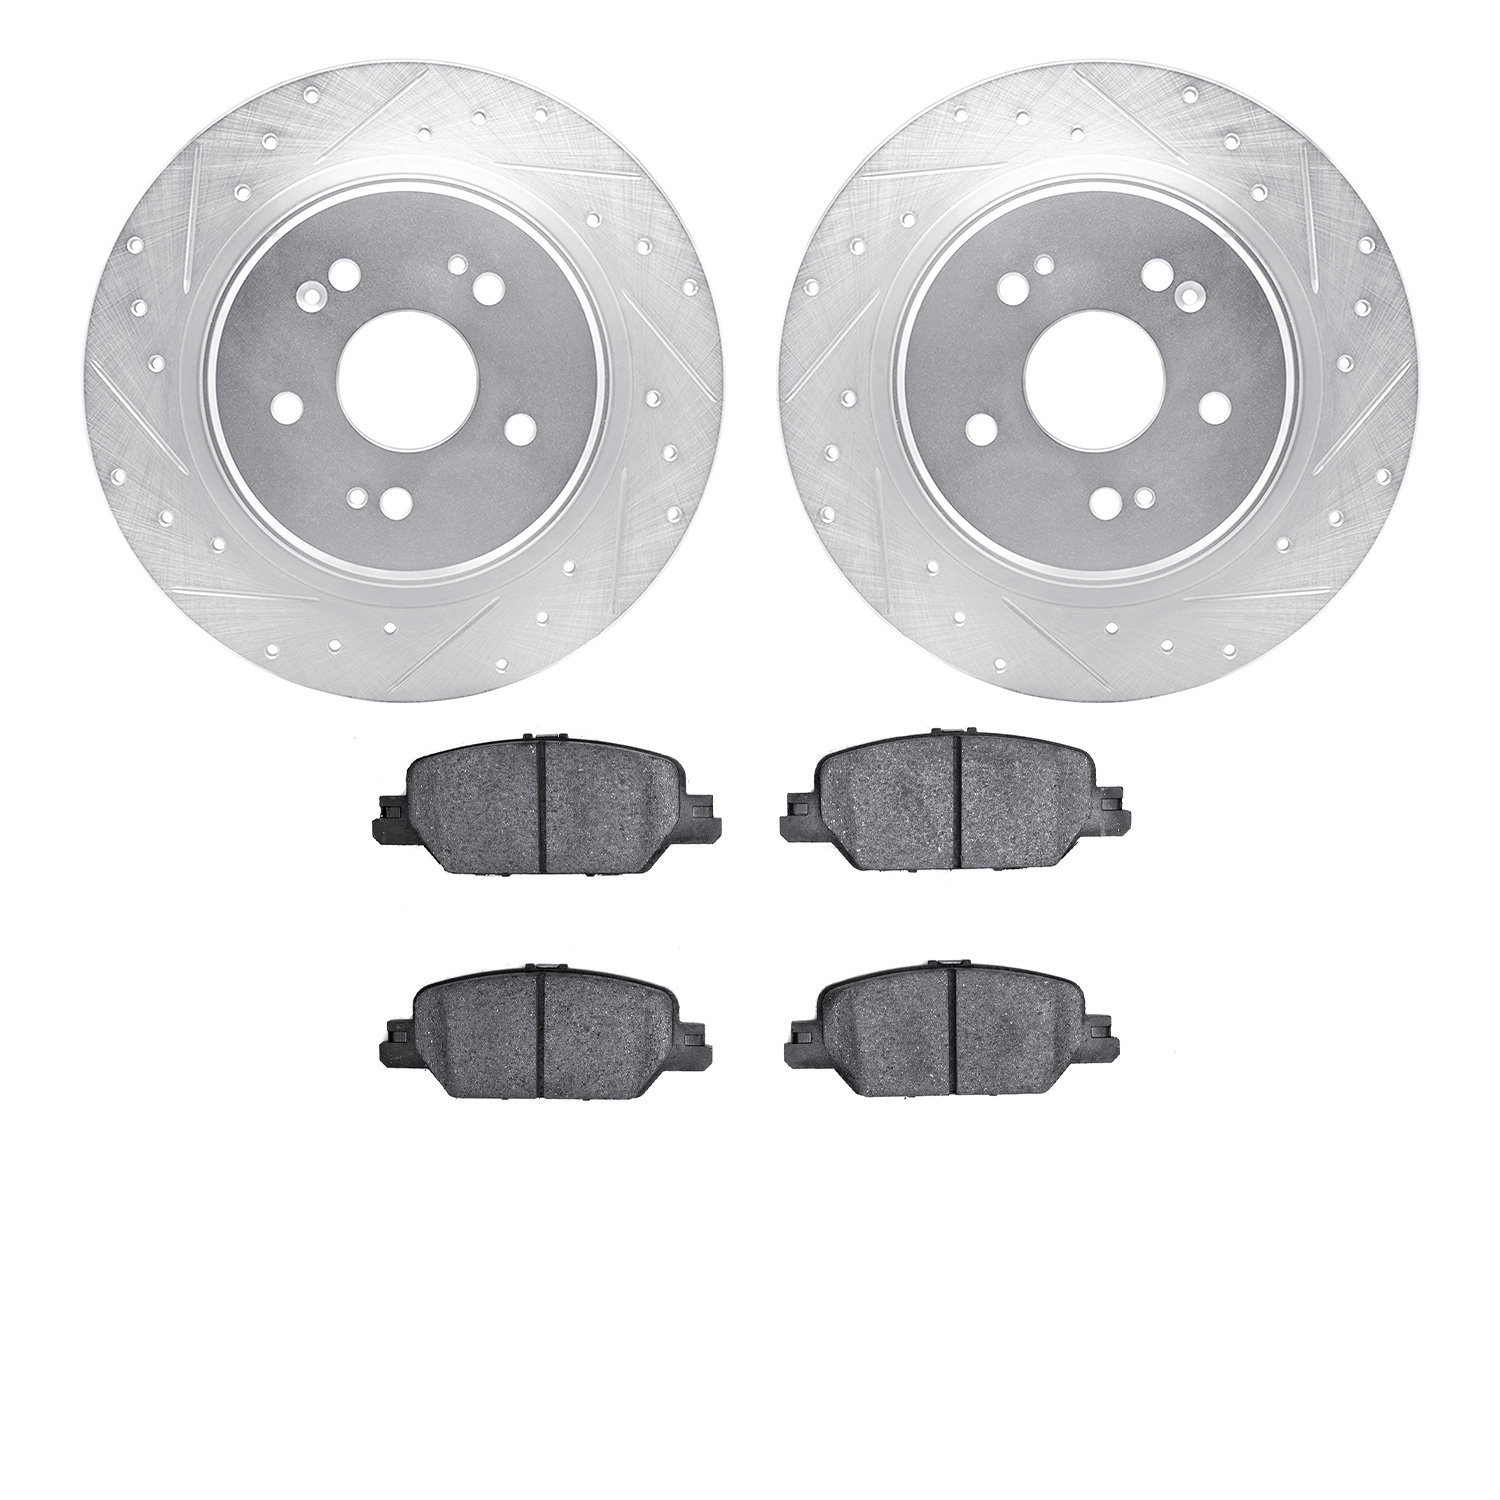 7502-58037 Drilled/Slotted Brake Rotors w/5000 Advanced Brake Pads Kit [Silver], Fits Select Acura/Honda, Position: Rear